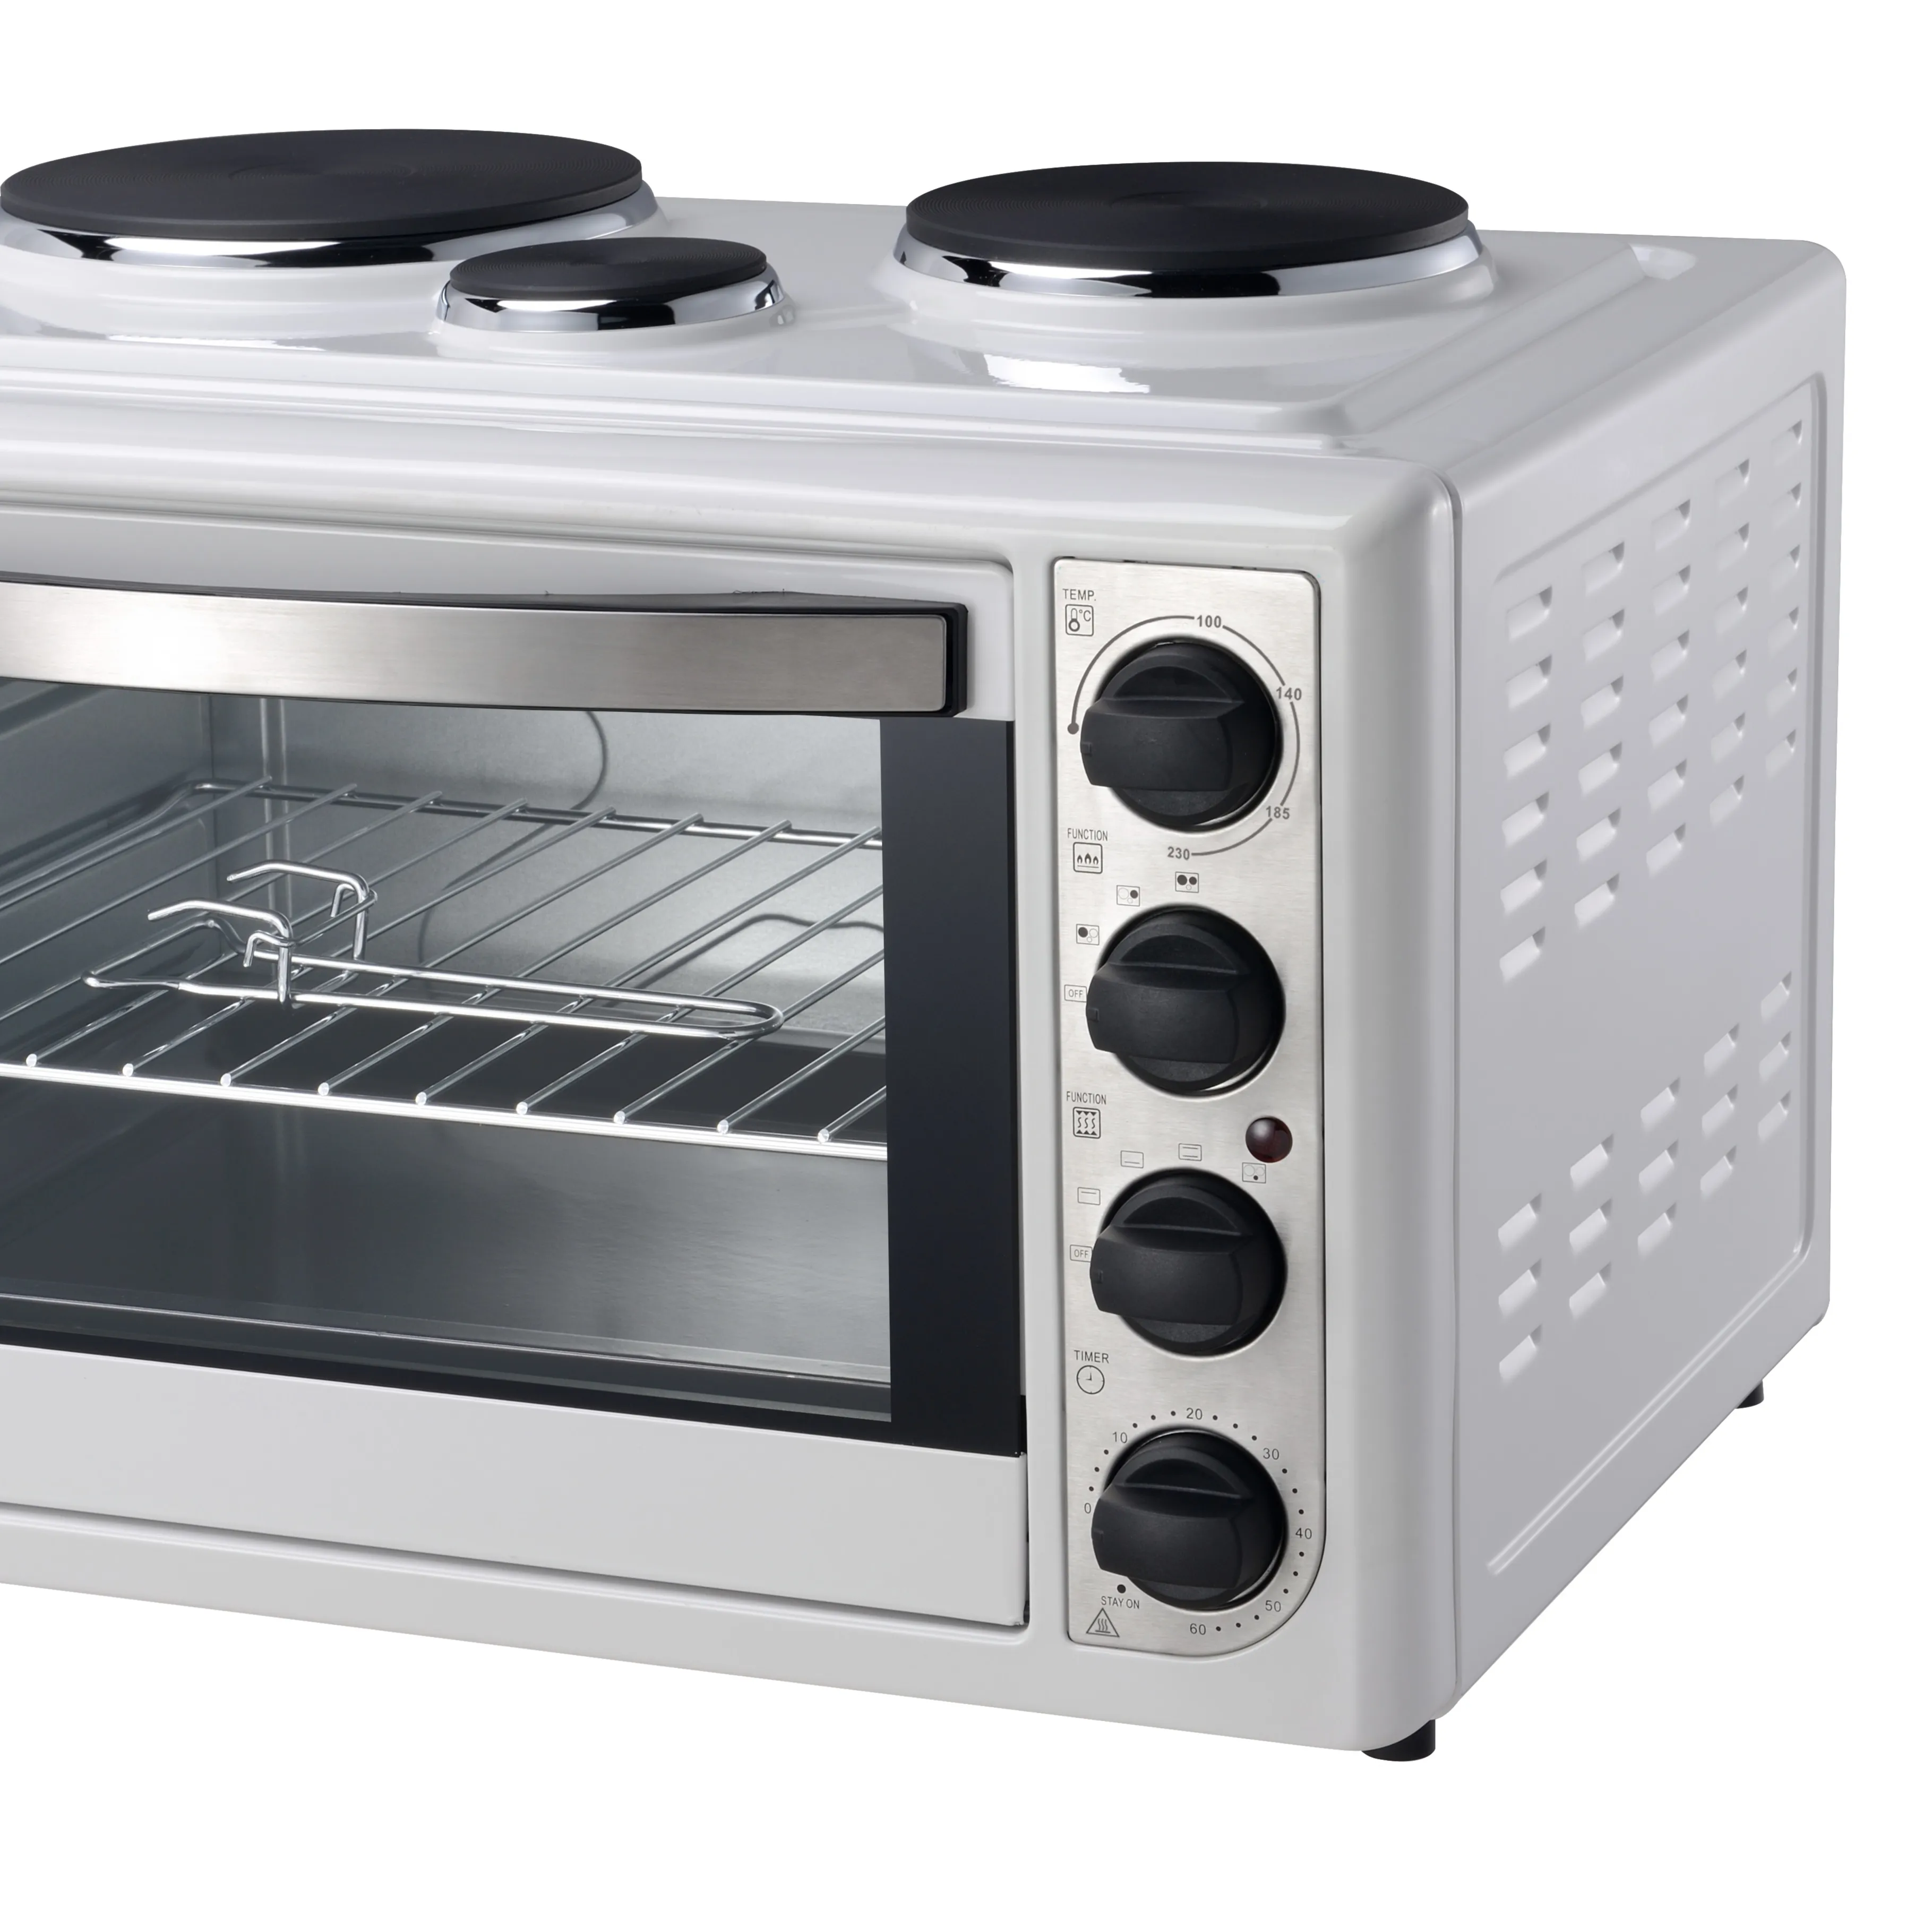 2023 BOMA hot vegetable processing bakery 48L Counter top baking 2000W forno a convezione